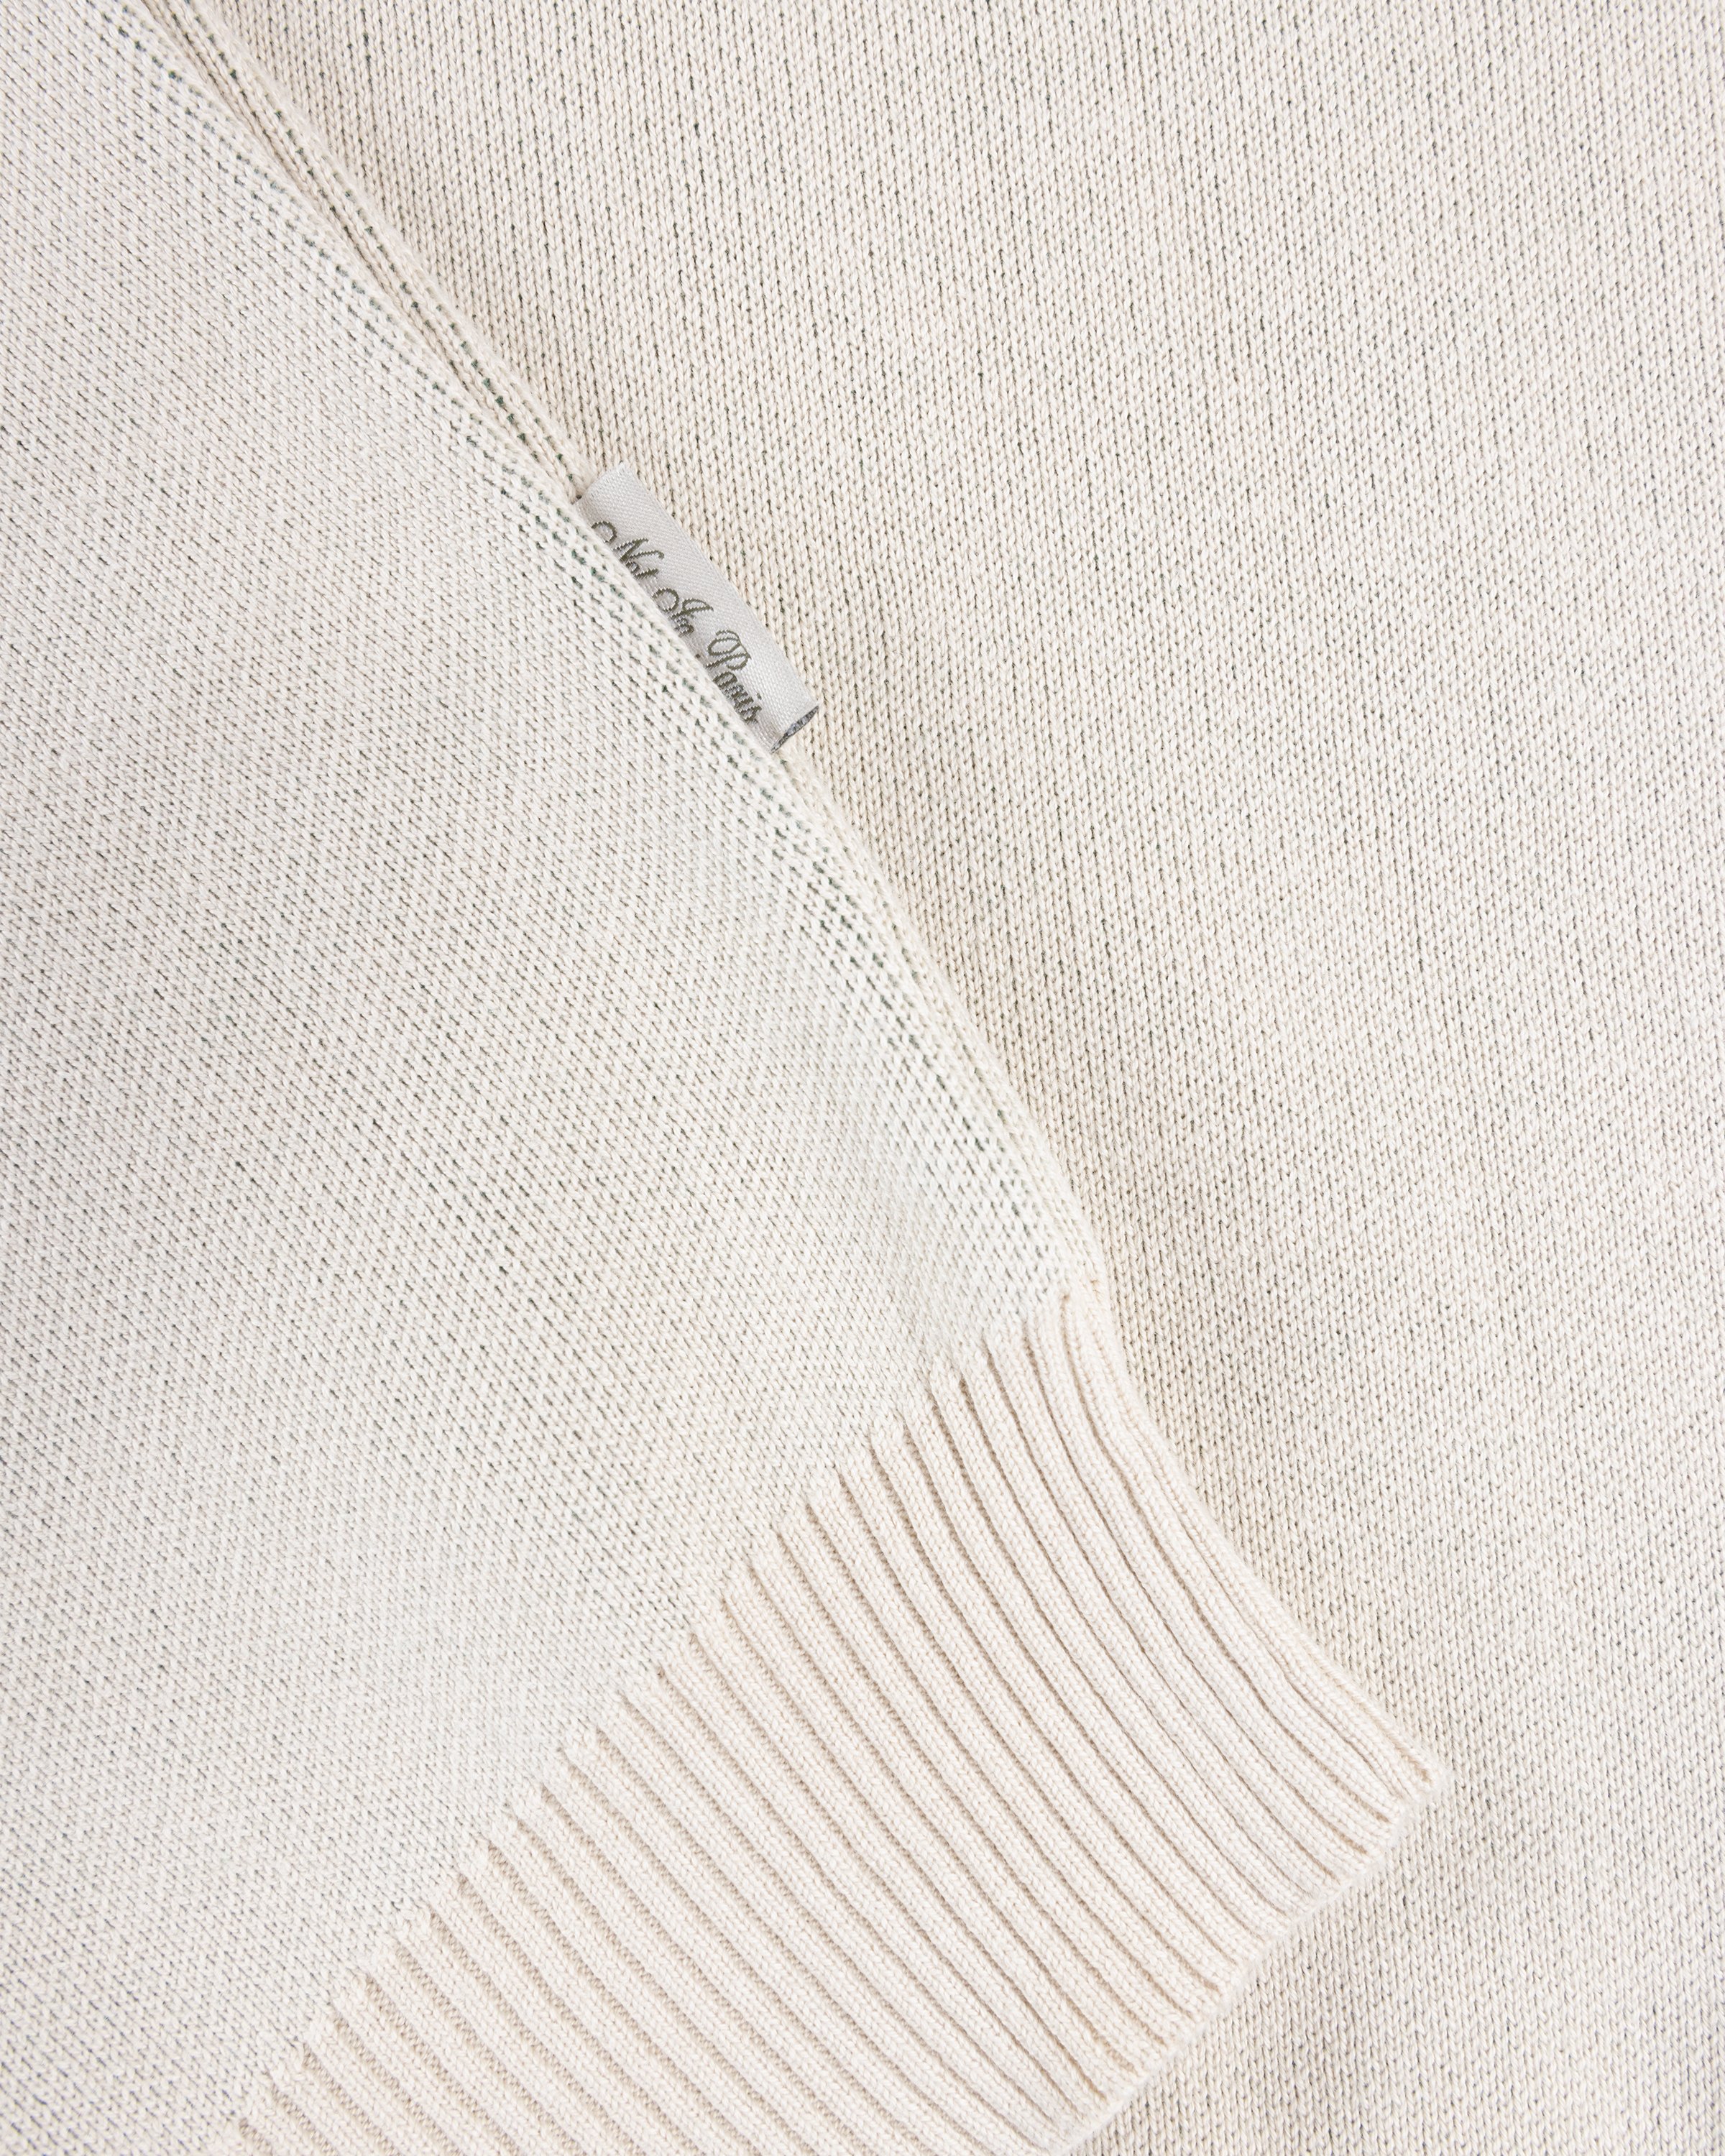 Highsnobiety - Not in Paris 5 Knitted Sweater - Clothing - Beige - Image 8